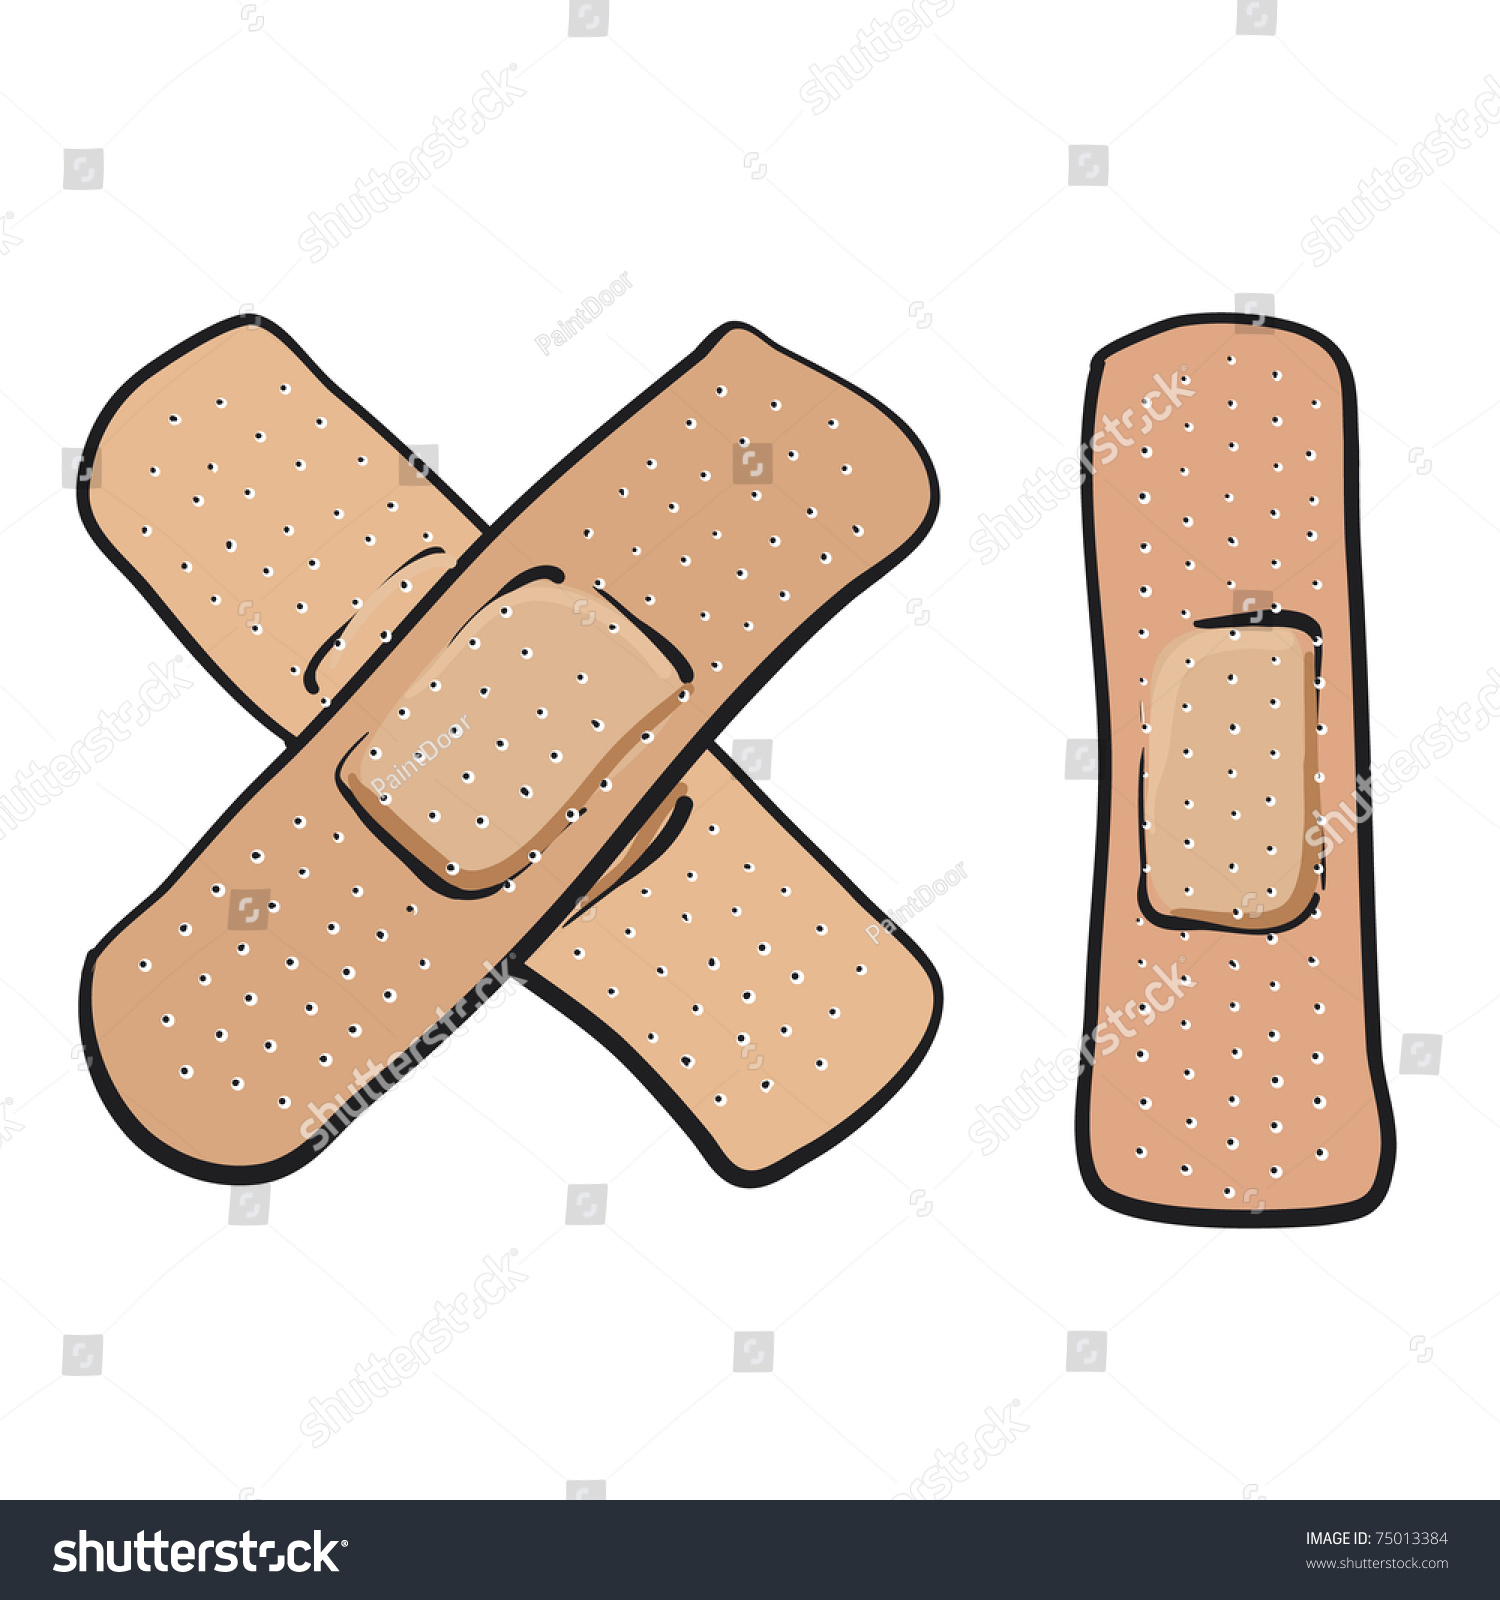 Bandages. A Sketch Of A Bandages For First Aid Stock Vector